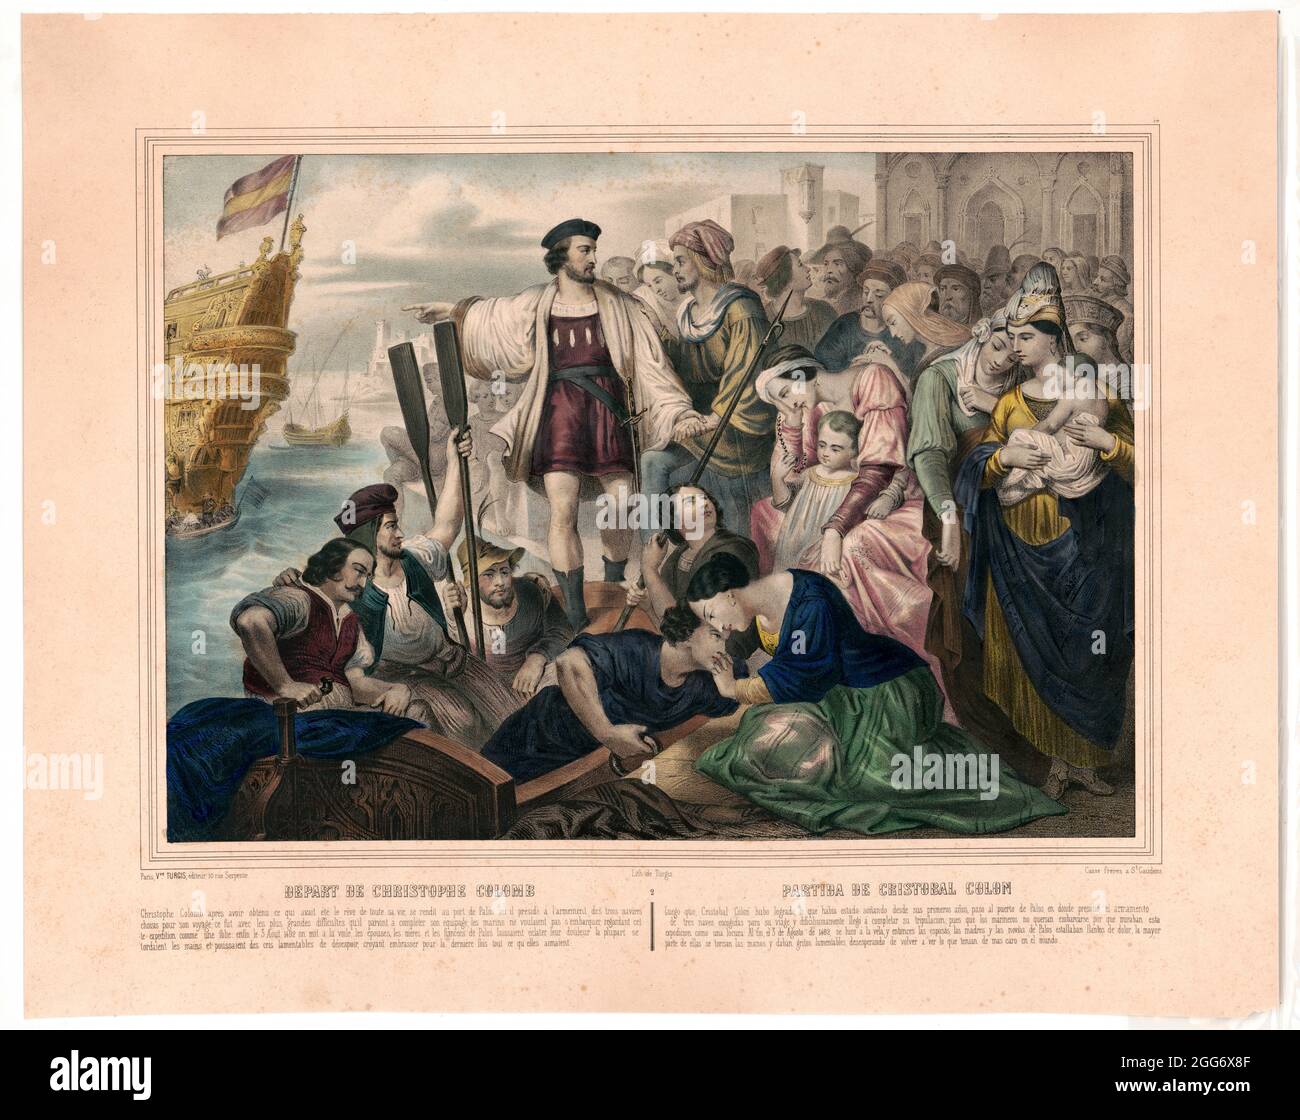 Christopher Columbus and his crew leaving the port of Palos, Spain, for the New World; crowd of well wishers looks on.  Picture 2 in a series of 4 digitally restored  Title: Depart de Christophe Colomb / lith. de Turgis ; Casse freres a St. Gaudens. Date Created/Published: Paris : Vve. Turgis, editeur, [between 1850 and 1900] Medium: 1 print : lithograph, color. Stock Photo